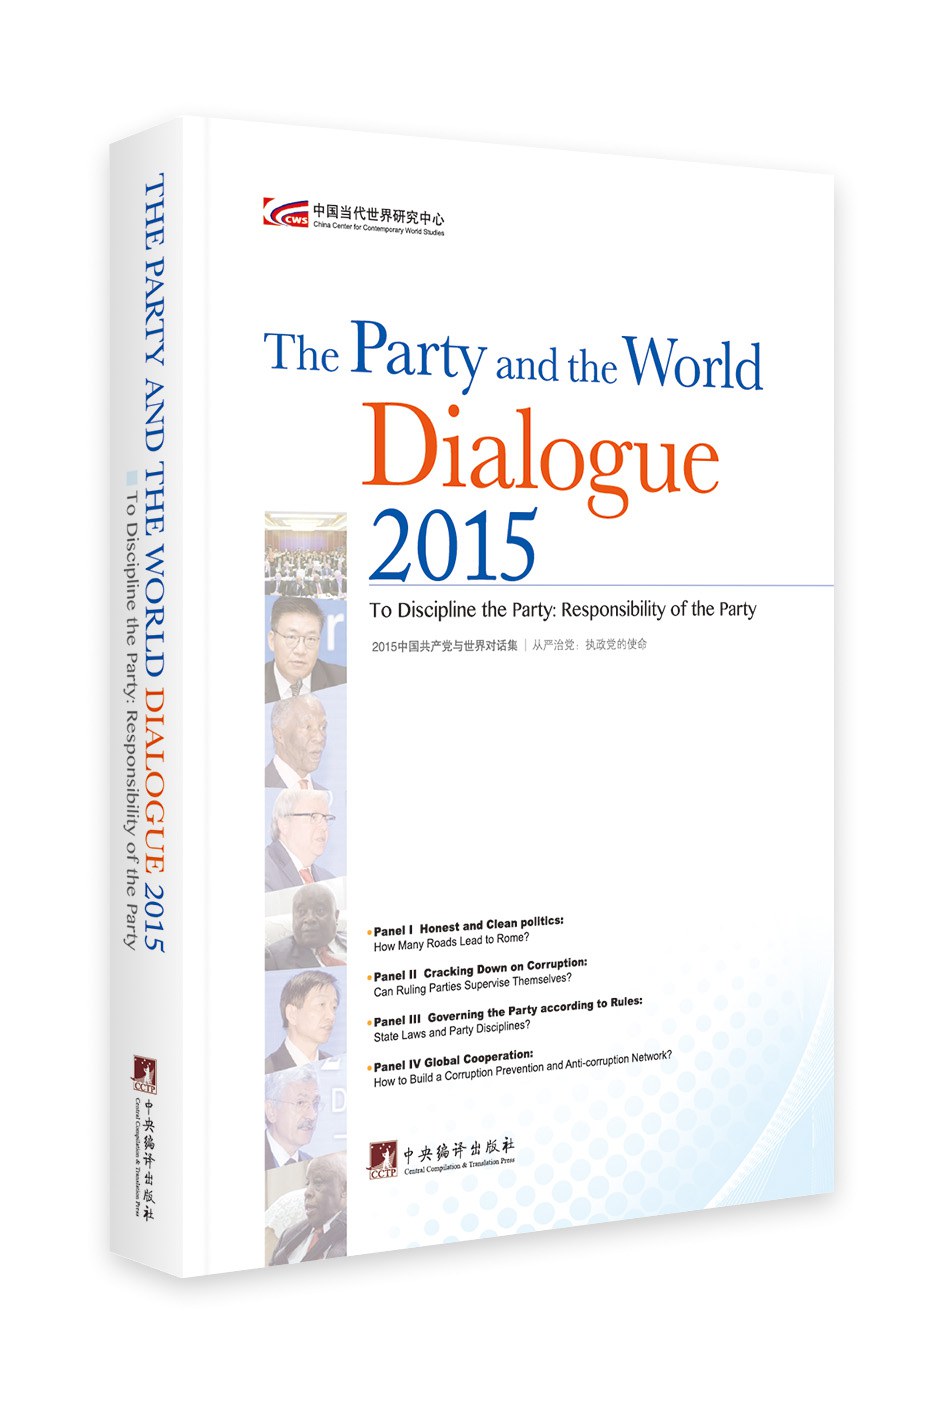 The party and the world dialogue 2015 : to discipline the party : responsibility of the party